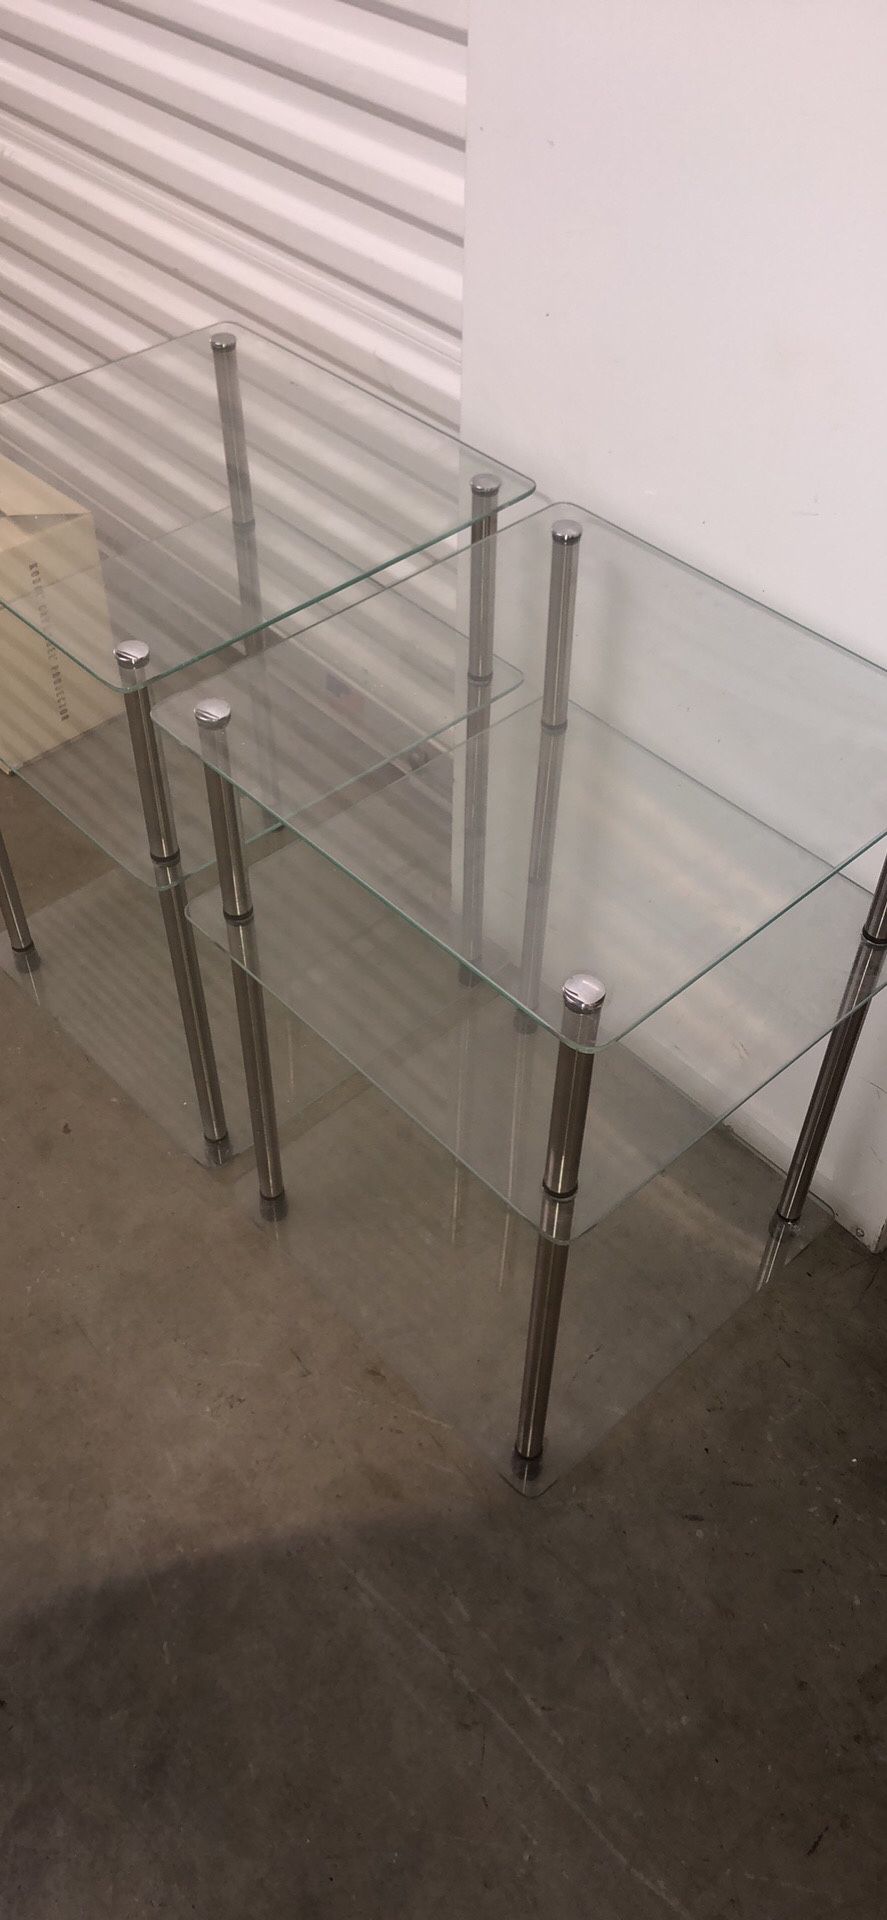 3 Tier Glass End Tables 